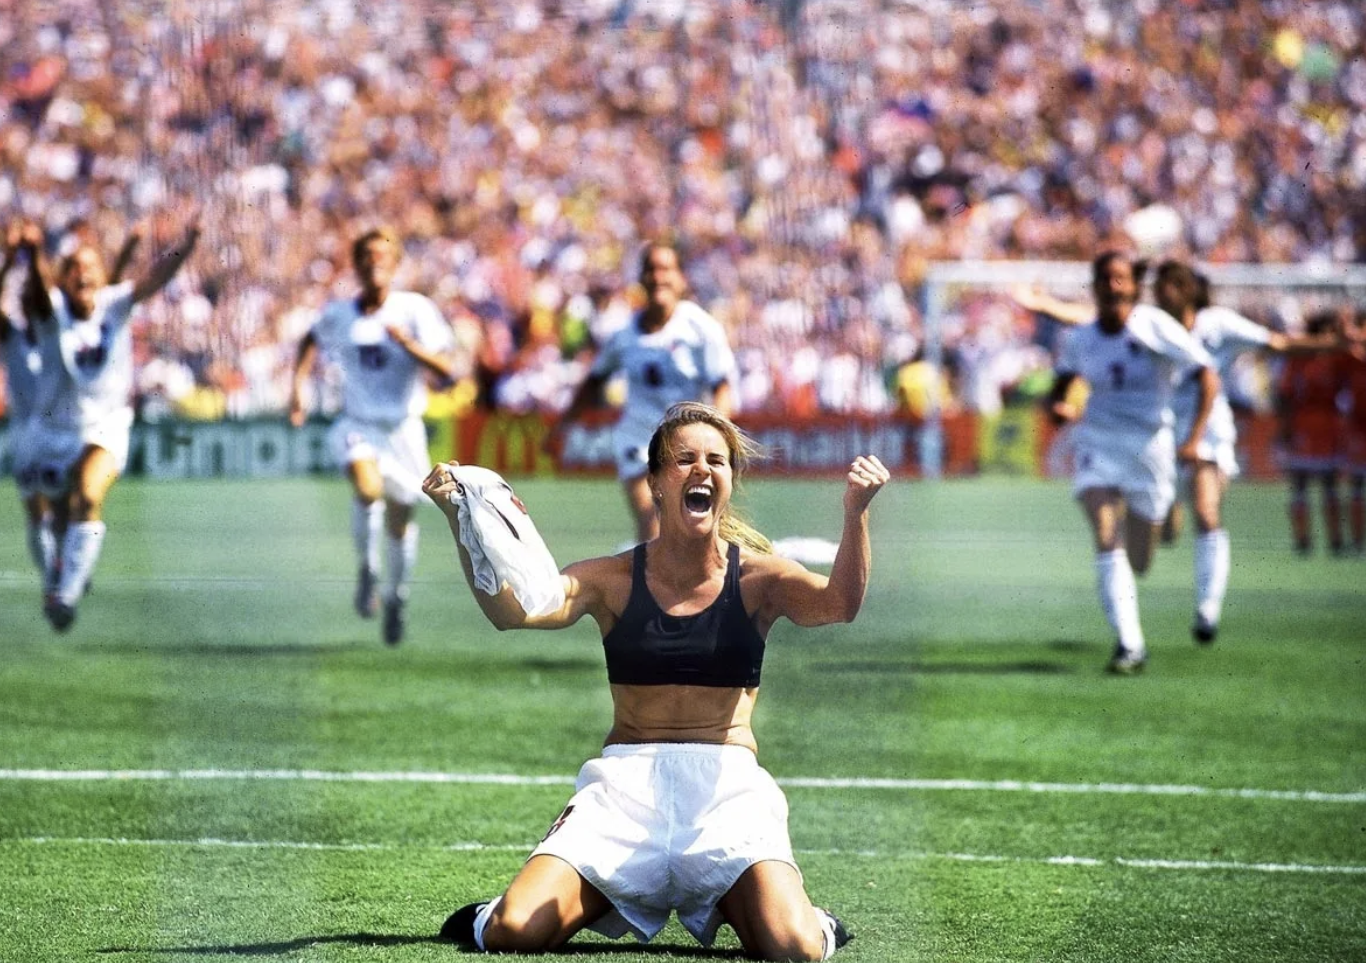 Most iconic fascinating sports photos - brandi chastain world cup